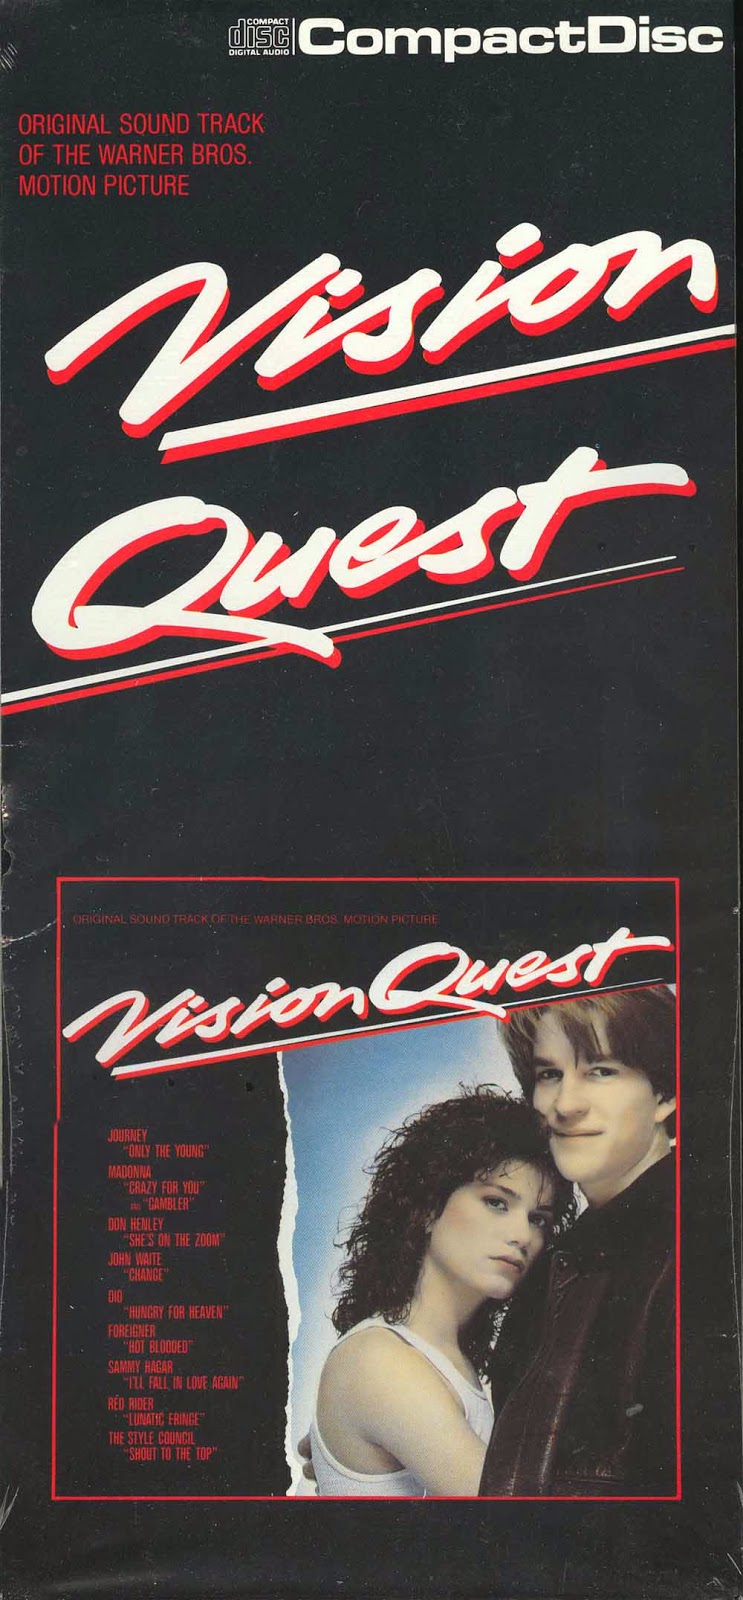 The Hideaway Vision Quest 1985